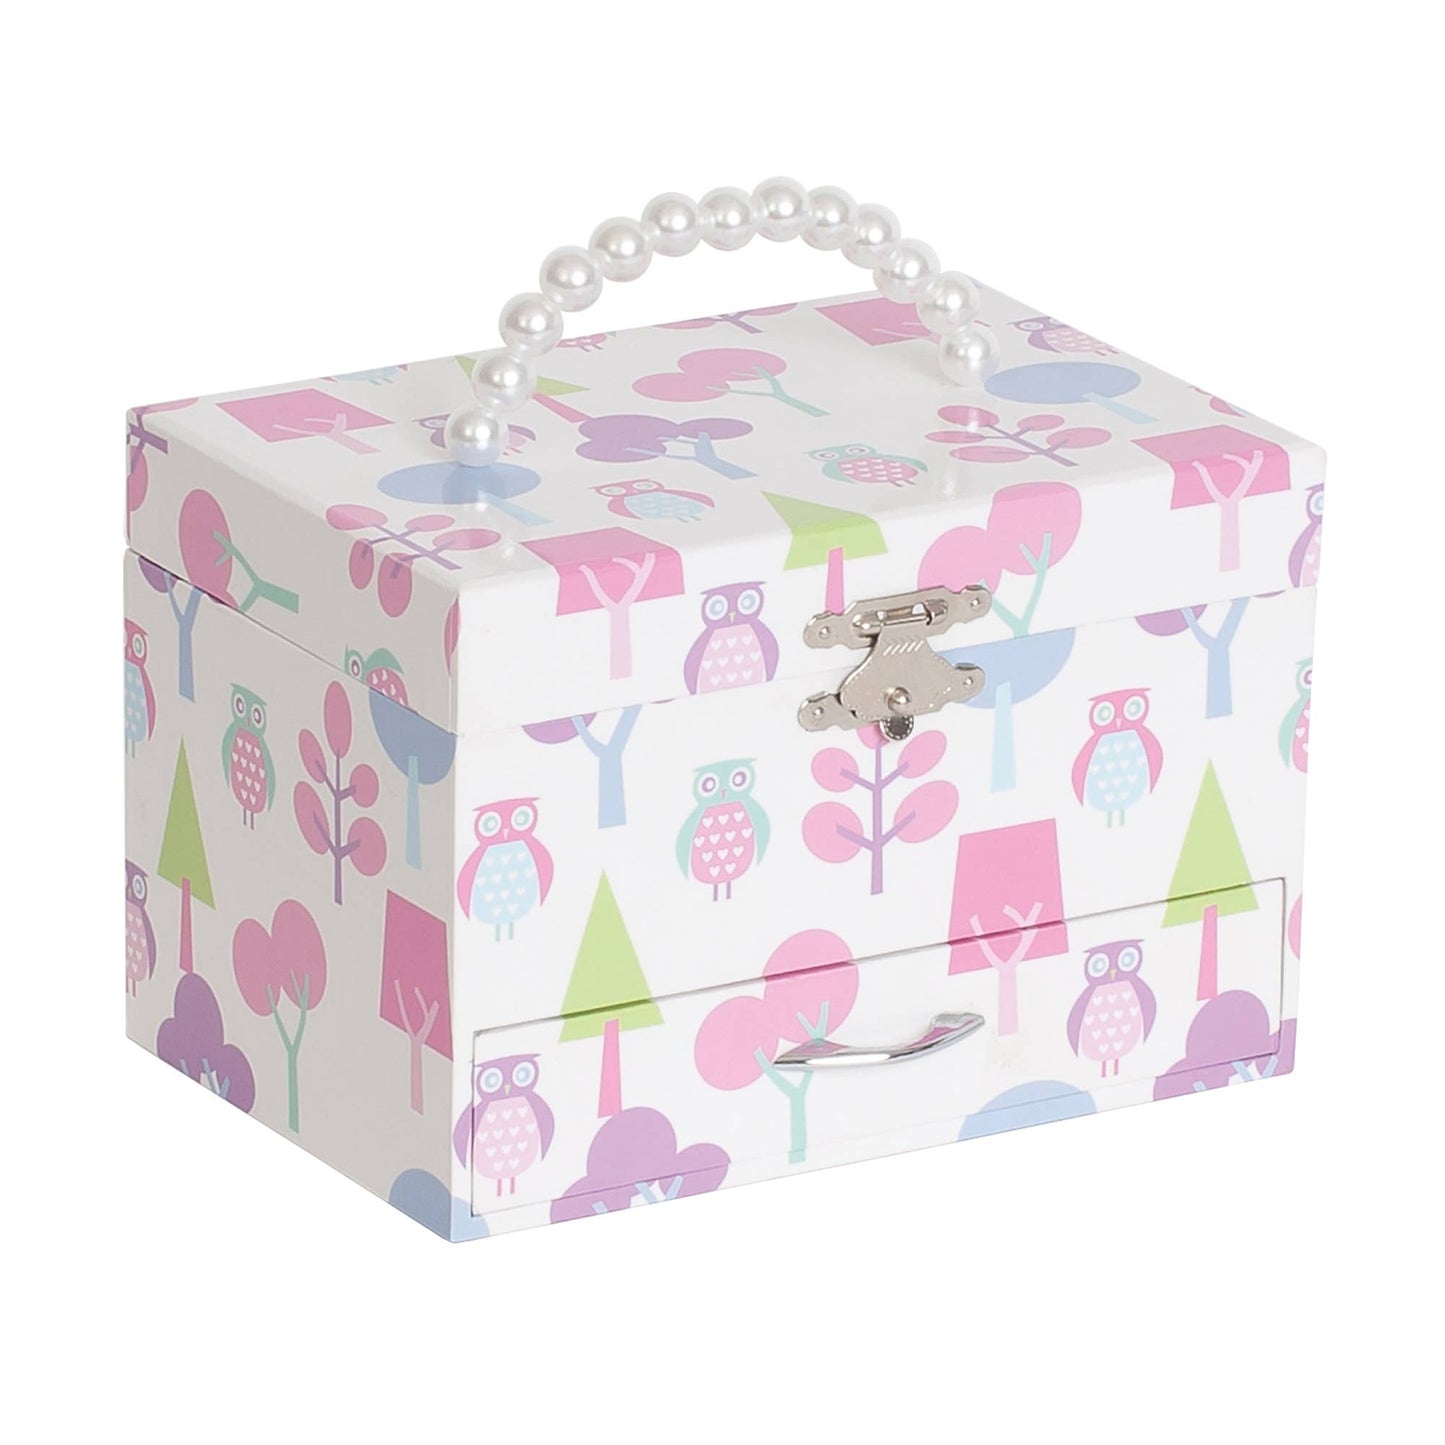 Mele and Co Molly Girls Musical Ballerina Jewelry Box